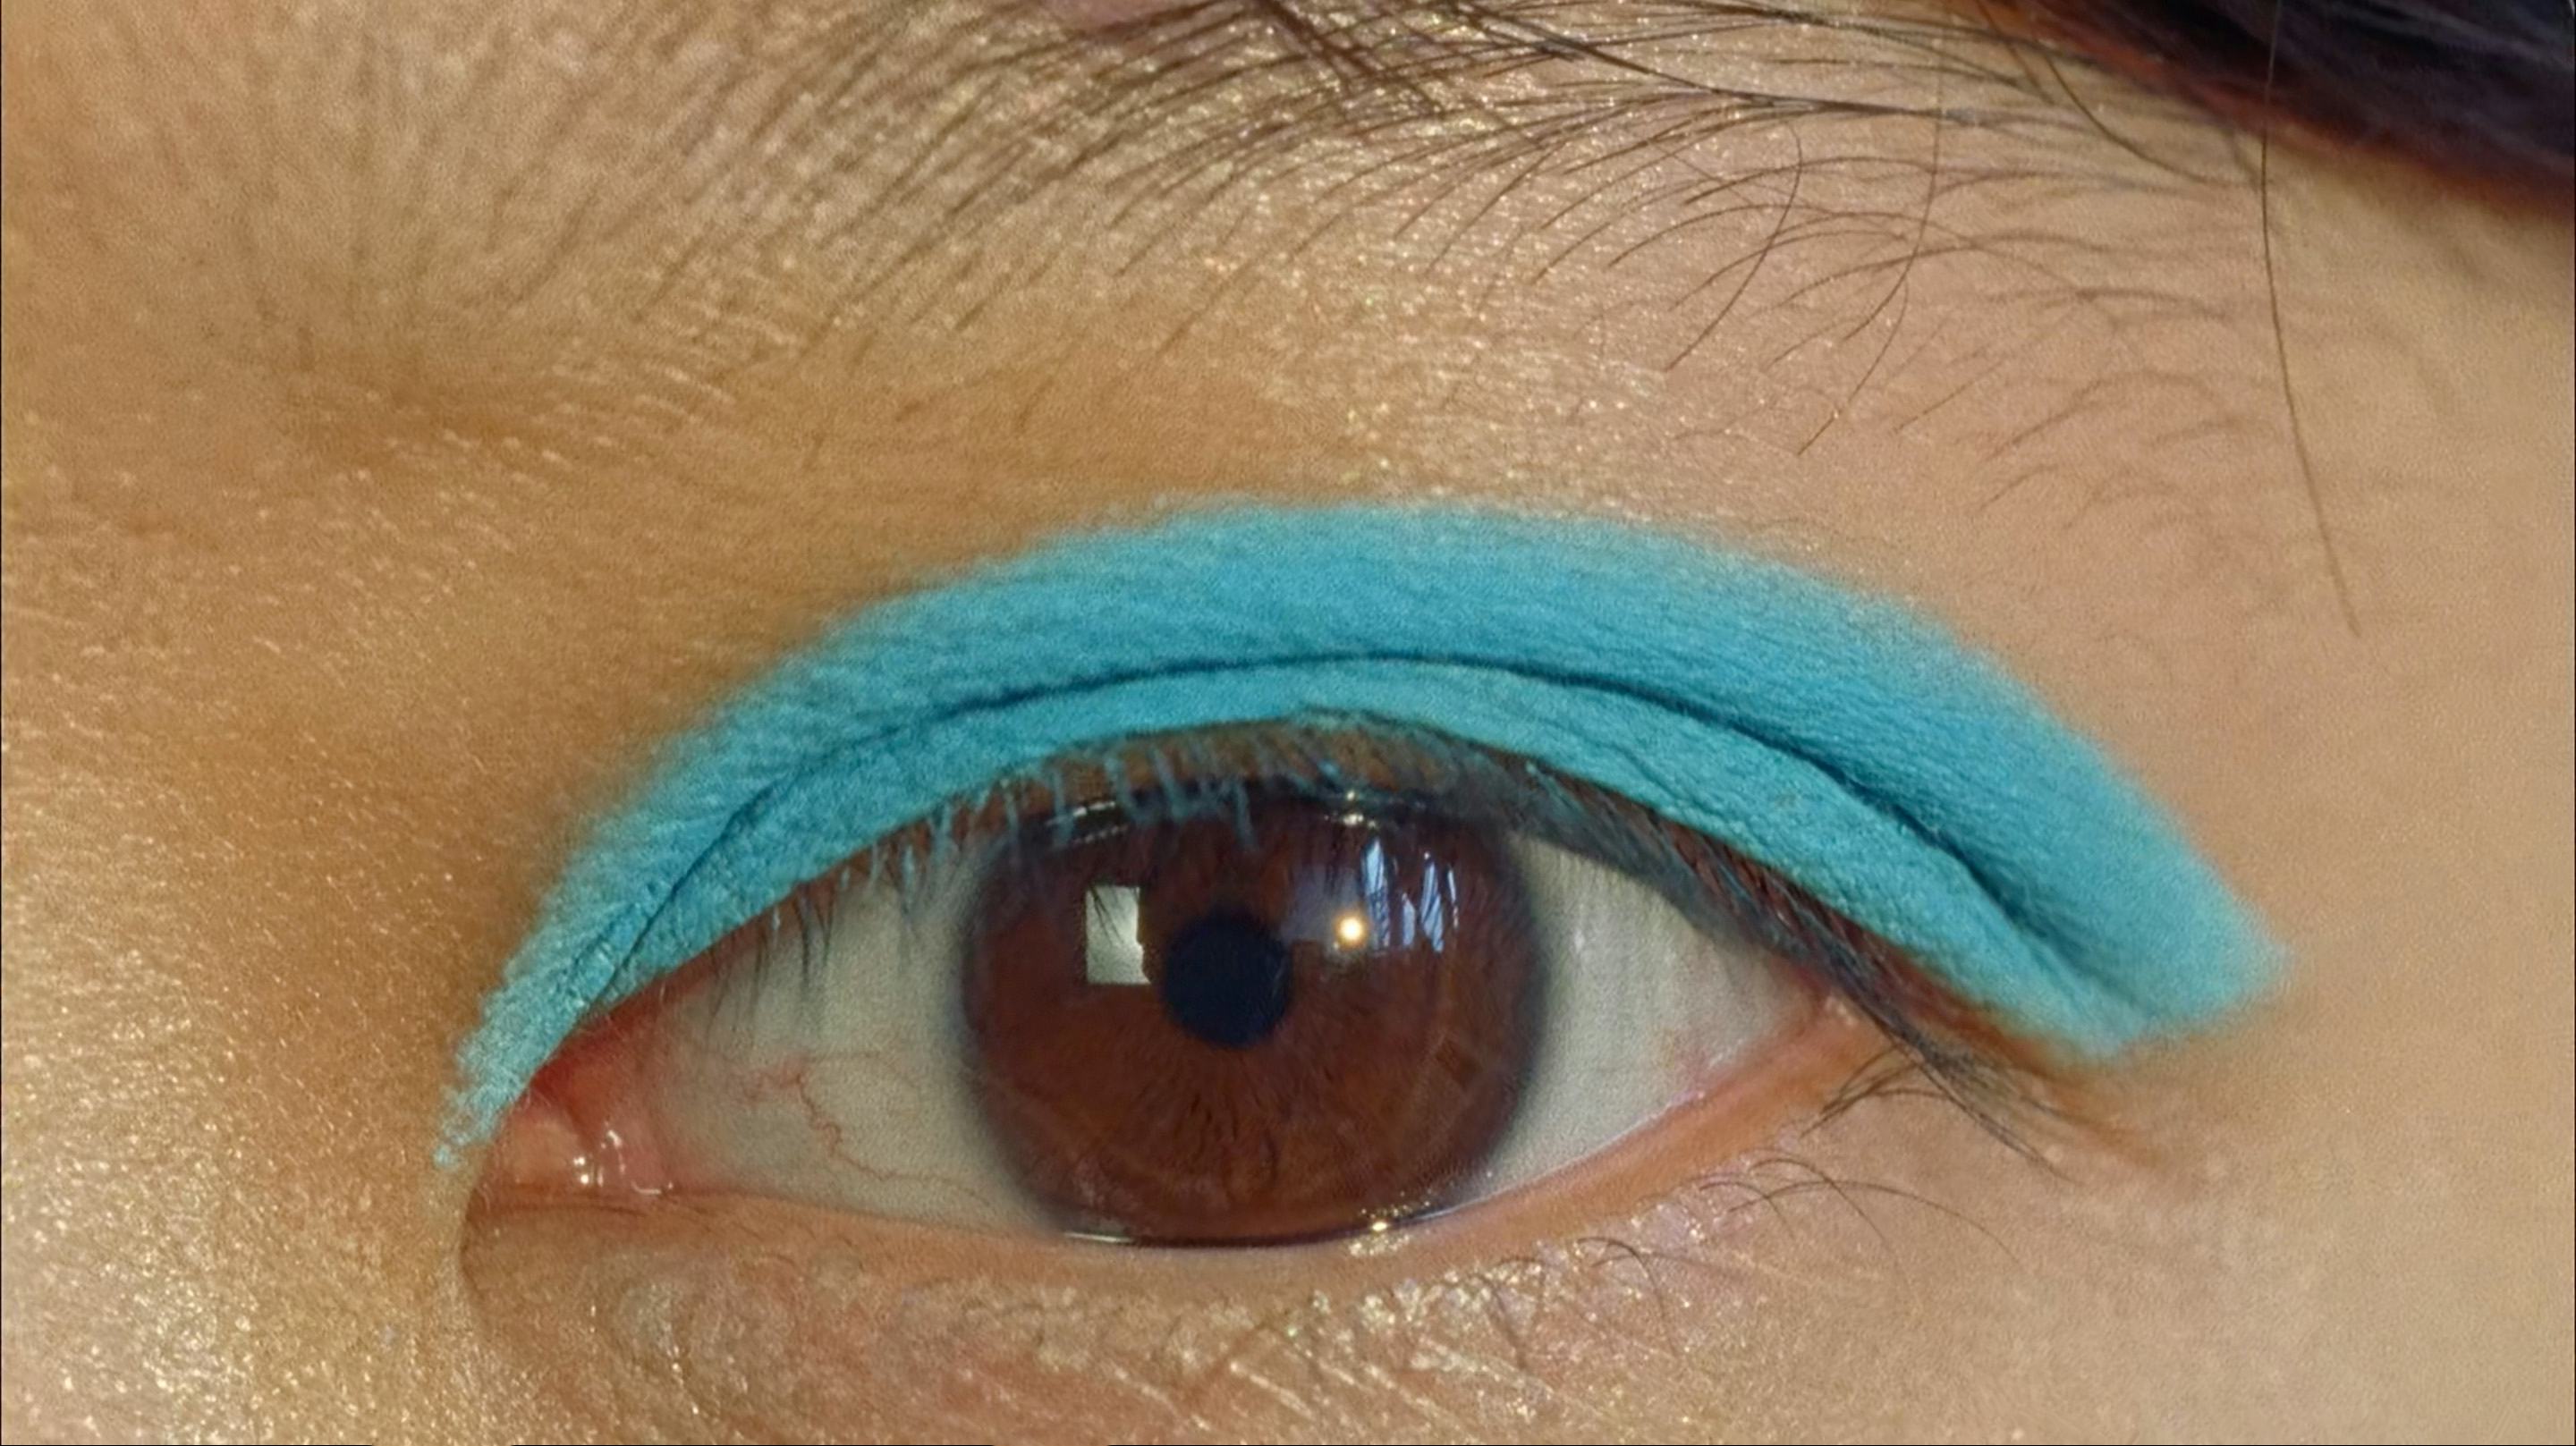 Close up of an eye with blue eyeshadow looking without emotion into the camera lense.